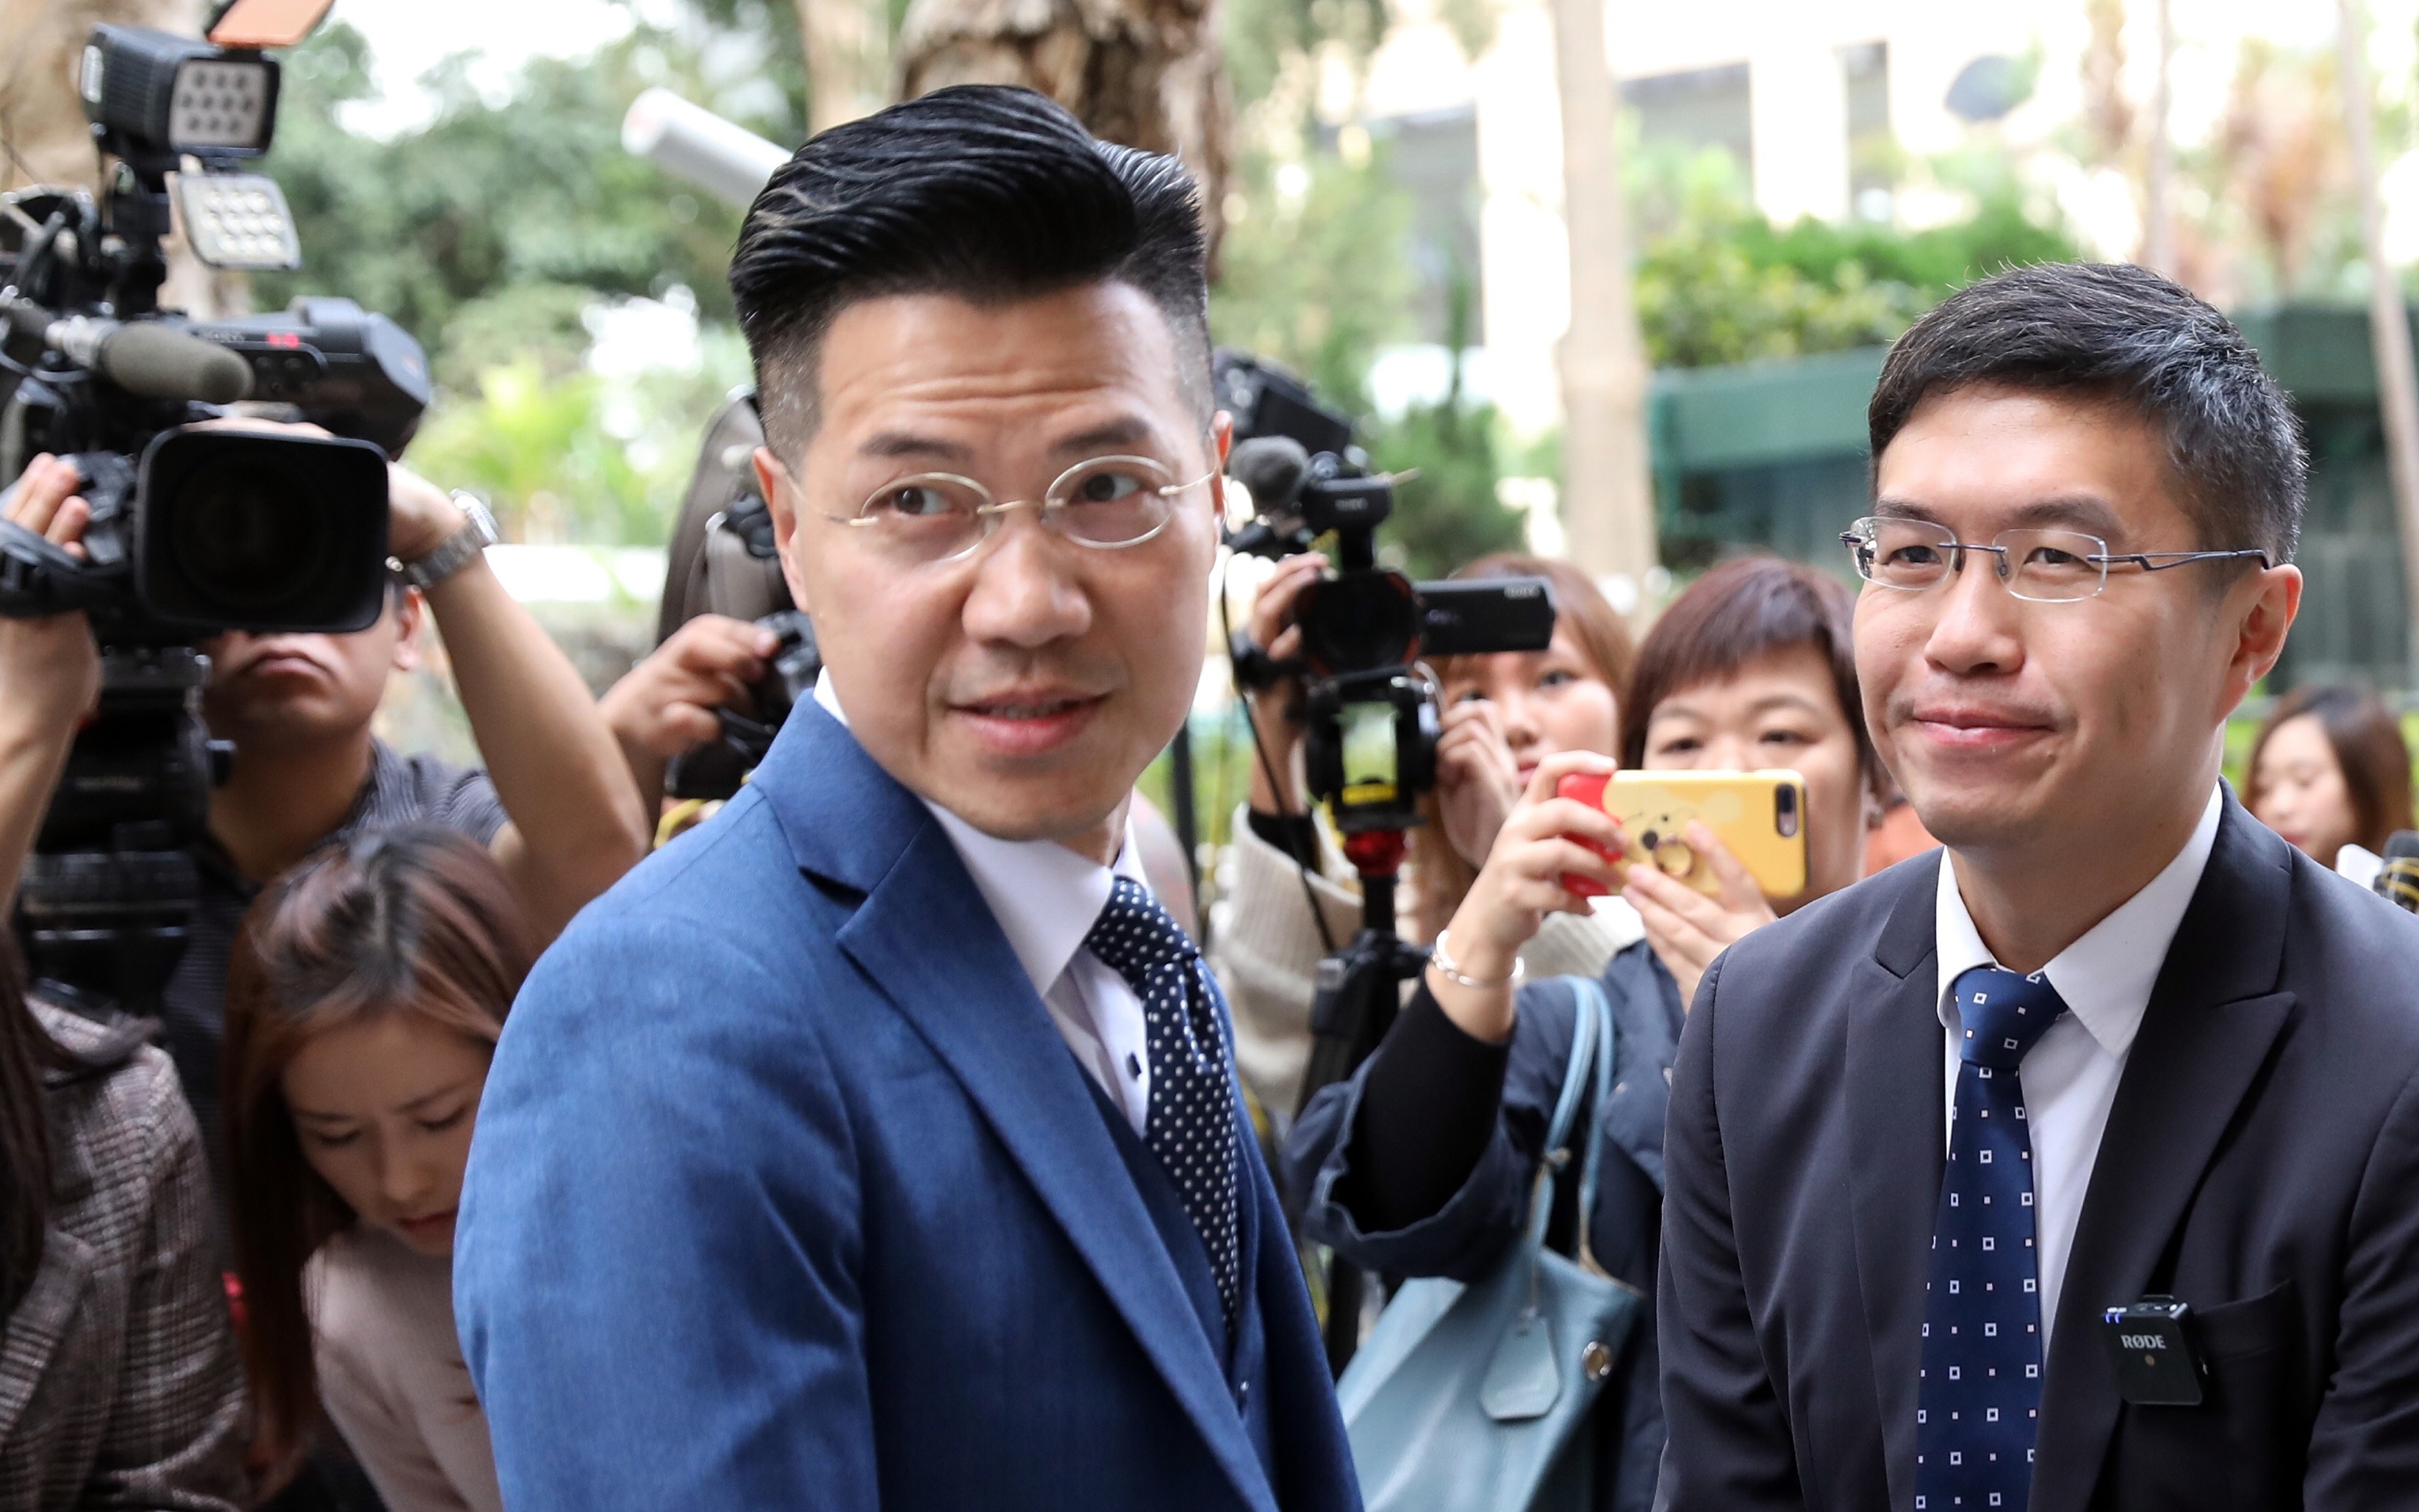 Pro-democracy lawmakers Gary Fan Kwok-wai (left) and Au Nok-hin at the Court of Final Appeal in Central on December 17. They were unseated when a court ruling rendered them unduly elected, because of the bungled disqualification of two other pro-democracy candidates ahead of a Legislative Council by-election in March 2018. Fan and Au had then contested those seats and won. Photo: Nora Tam